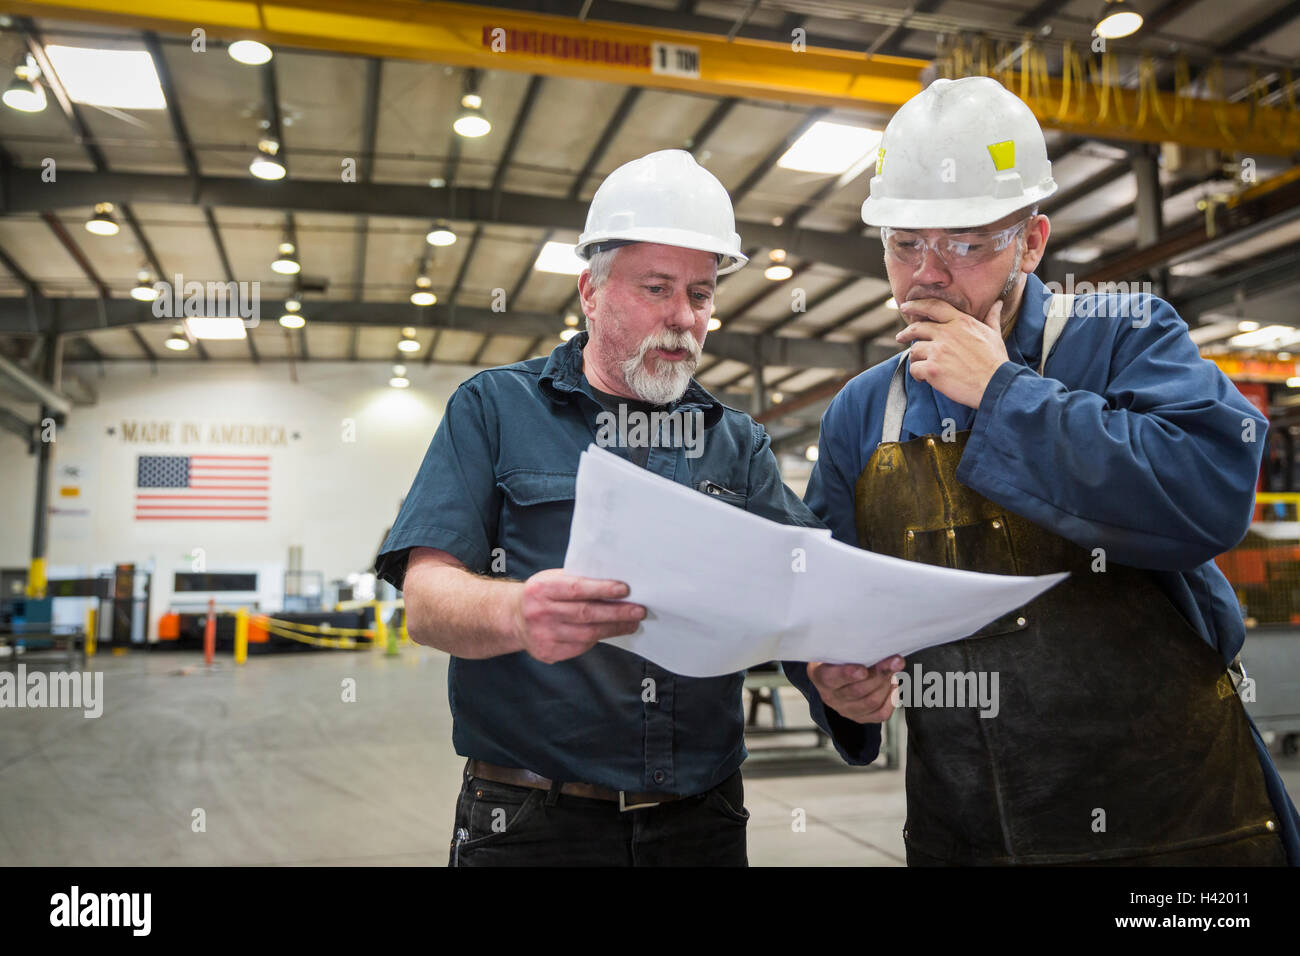 Workers examining paperwork in factory Stock Photo